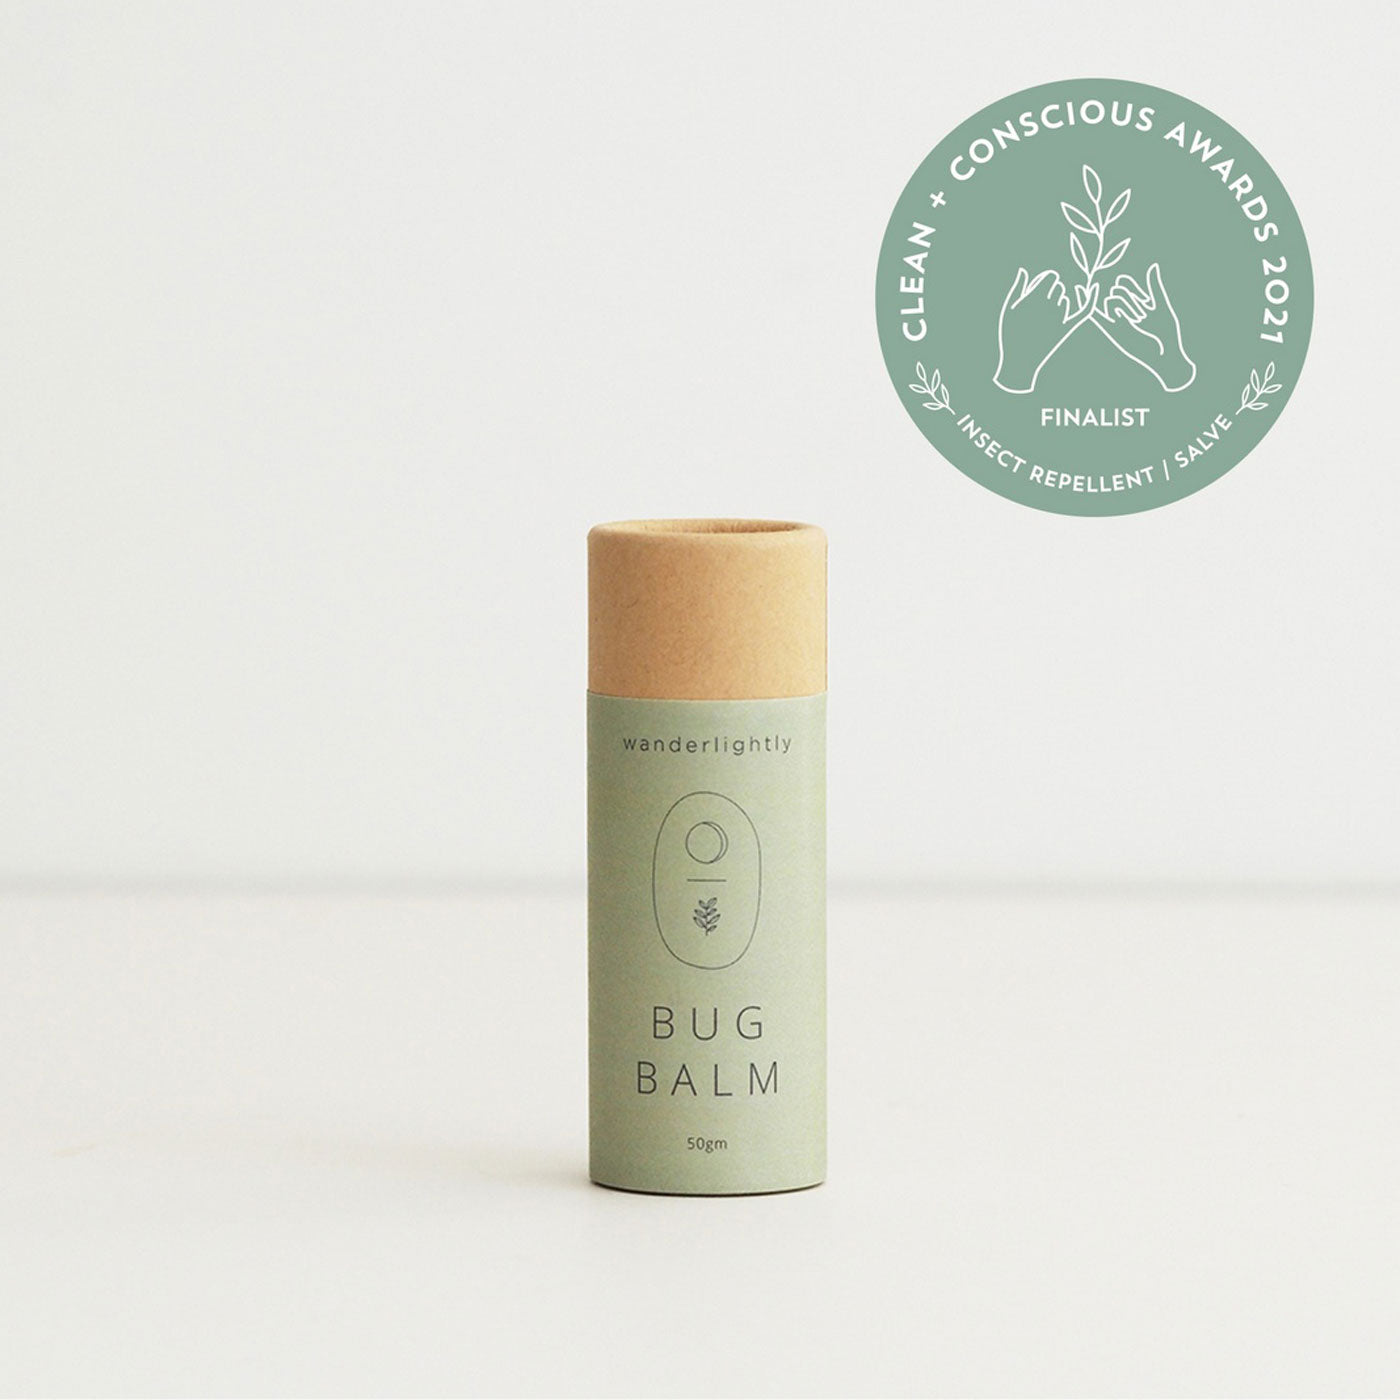 1 Tube of wanderlightly vegan and all-natural bug balm in a cardboard recyclable tube.